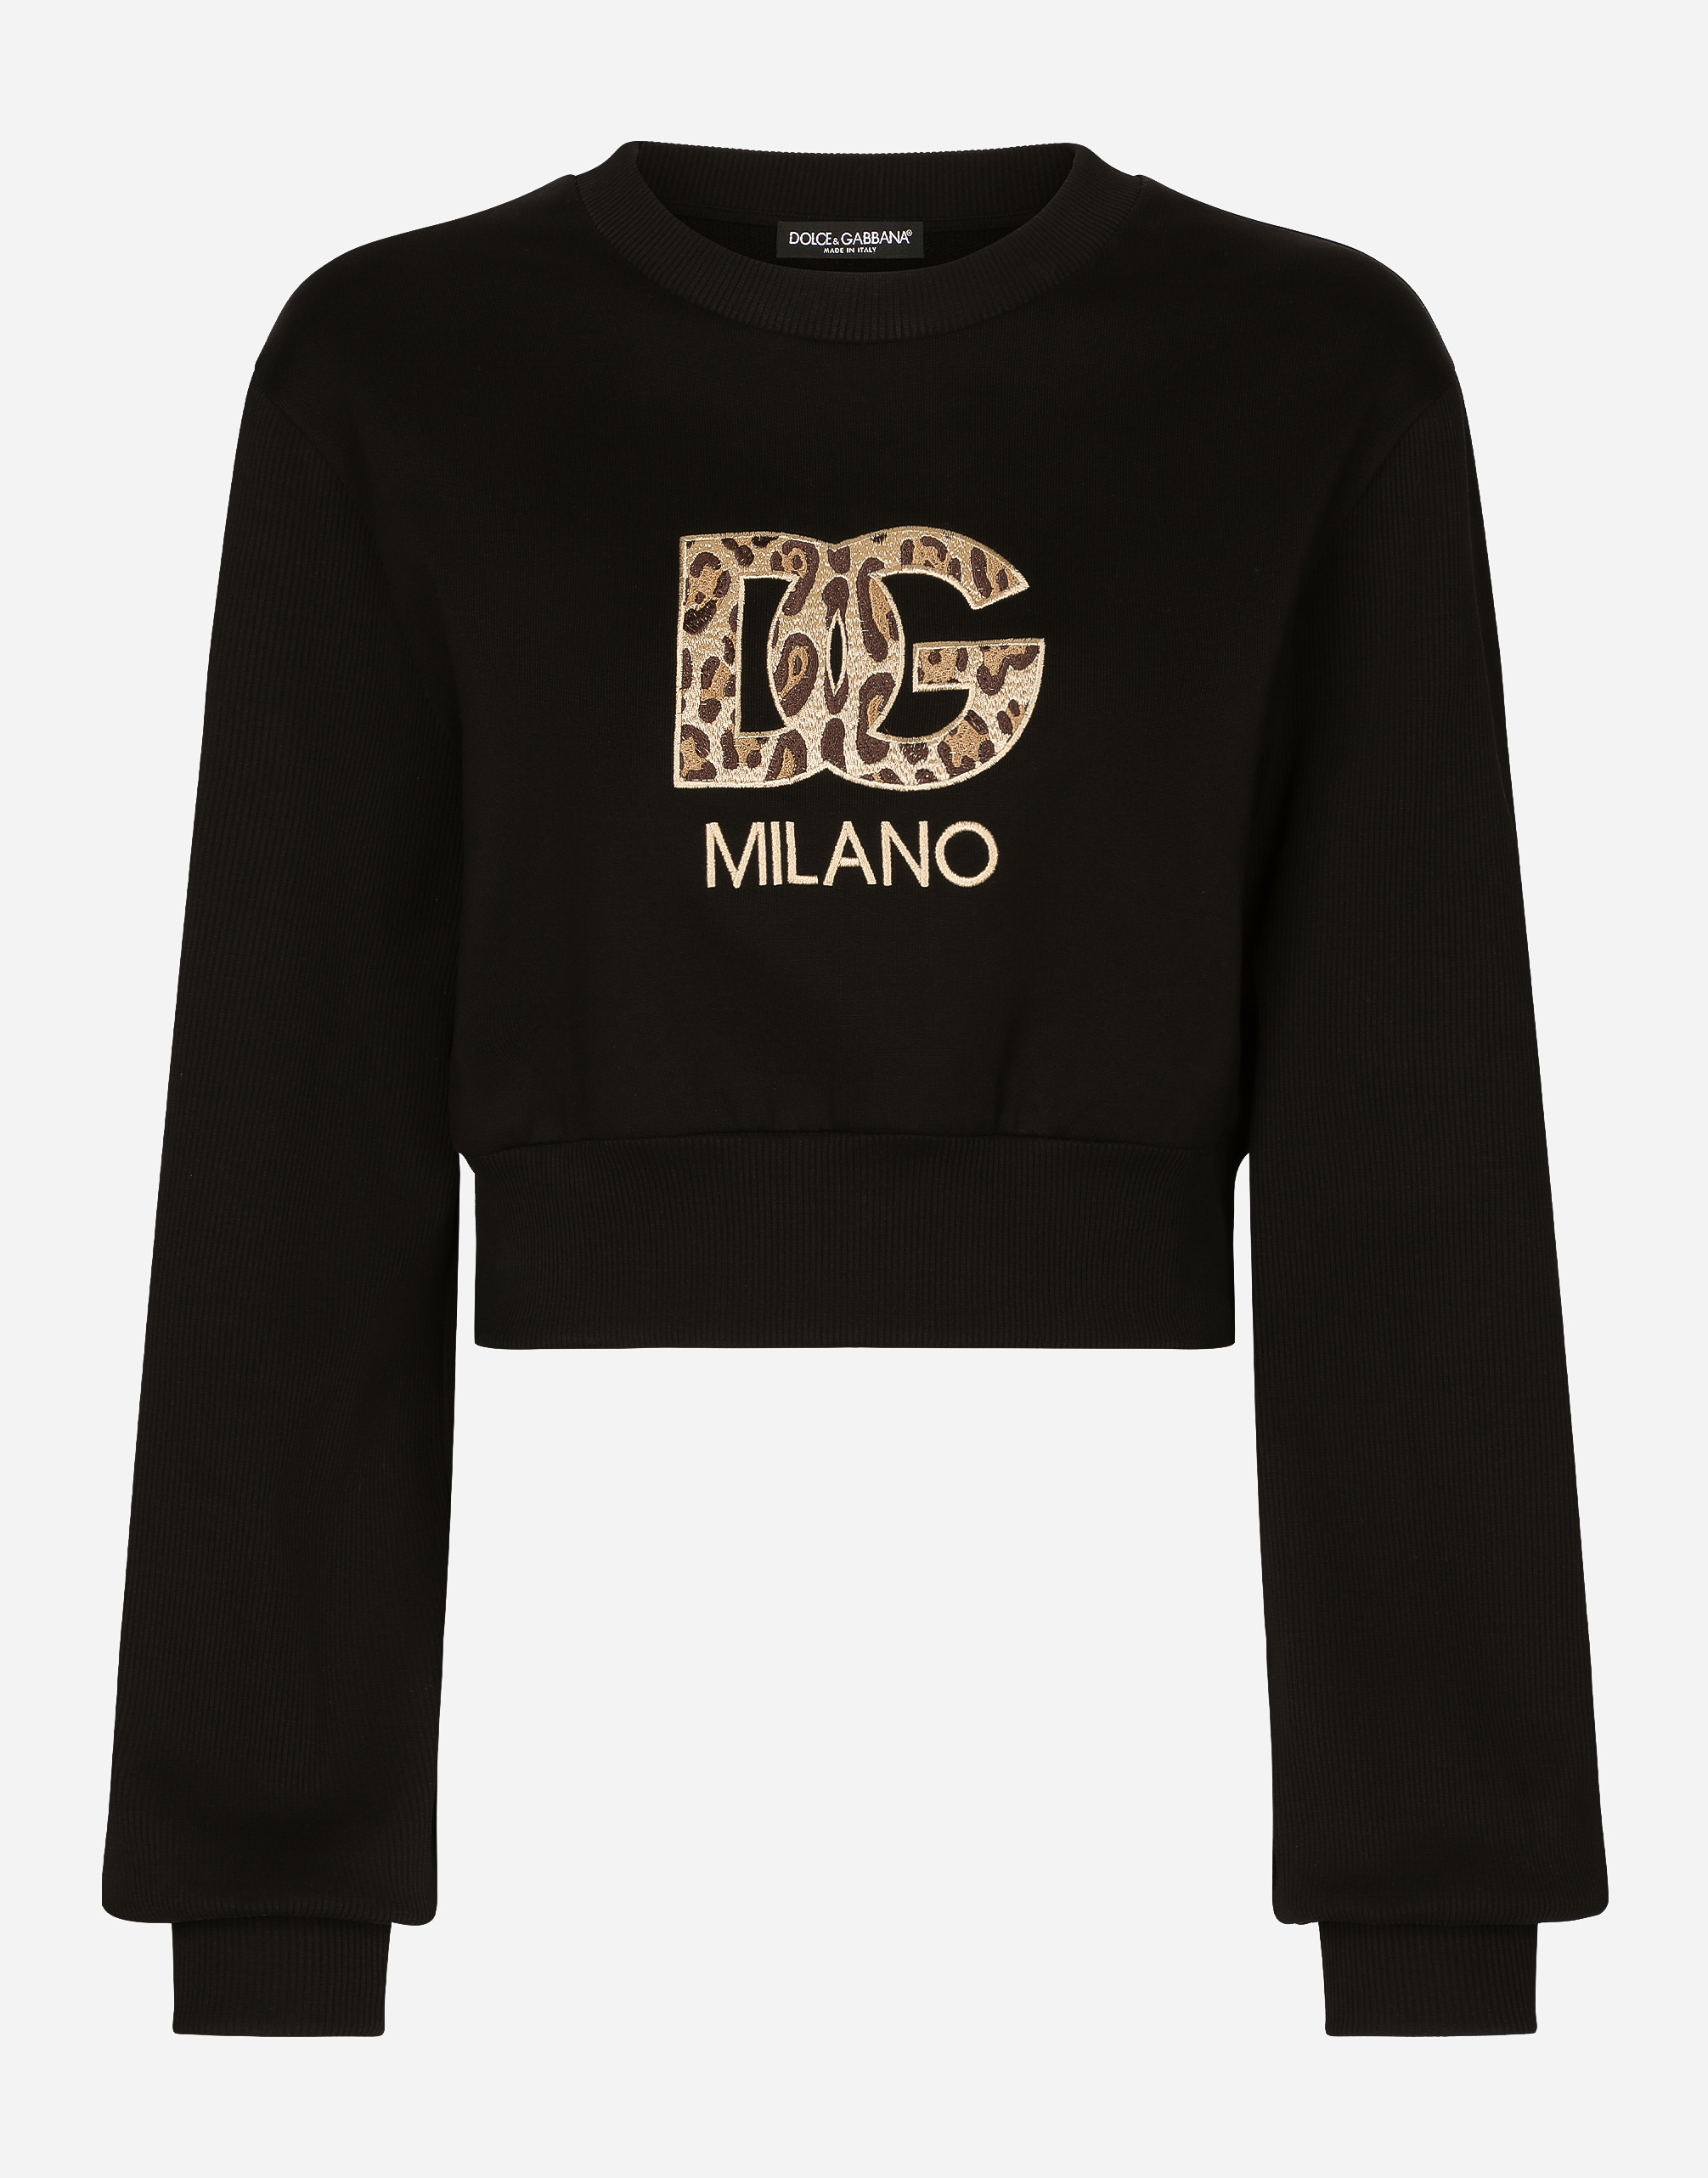 Dolce & Gabbana Cropped Jersey Sweatshirt With Embroidered Dg Patch In Black